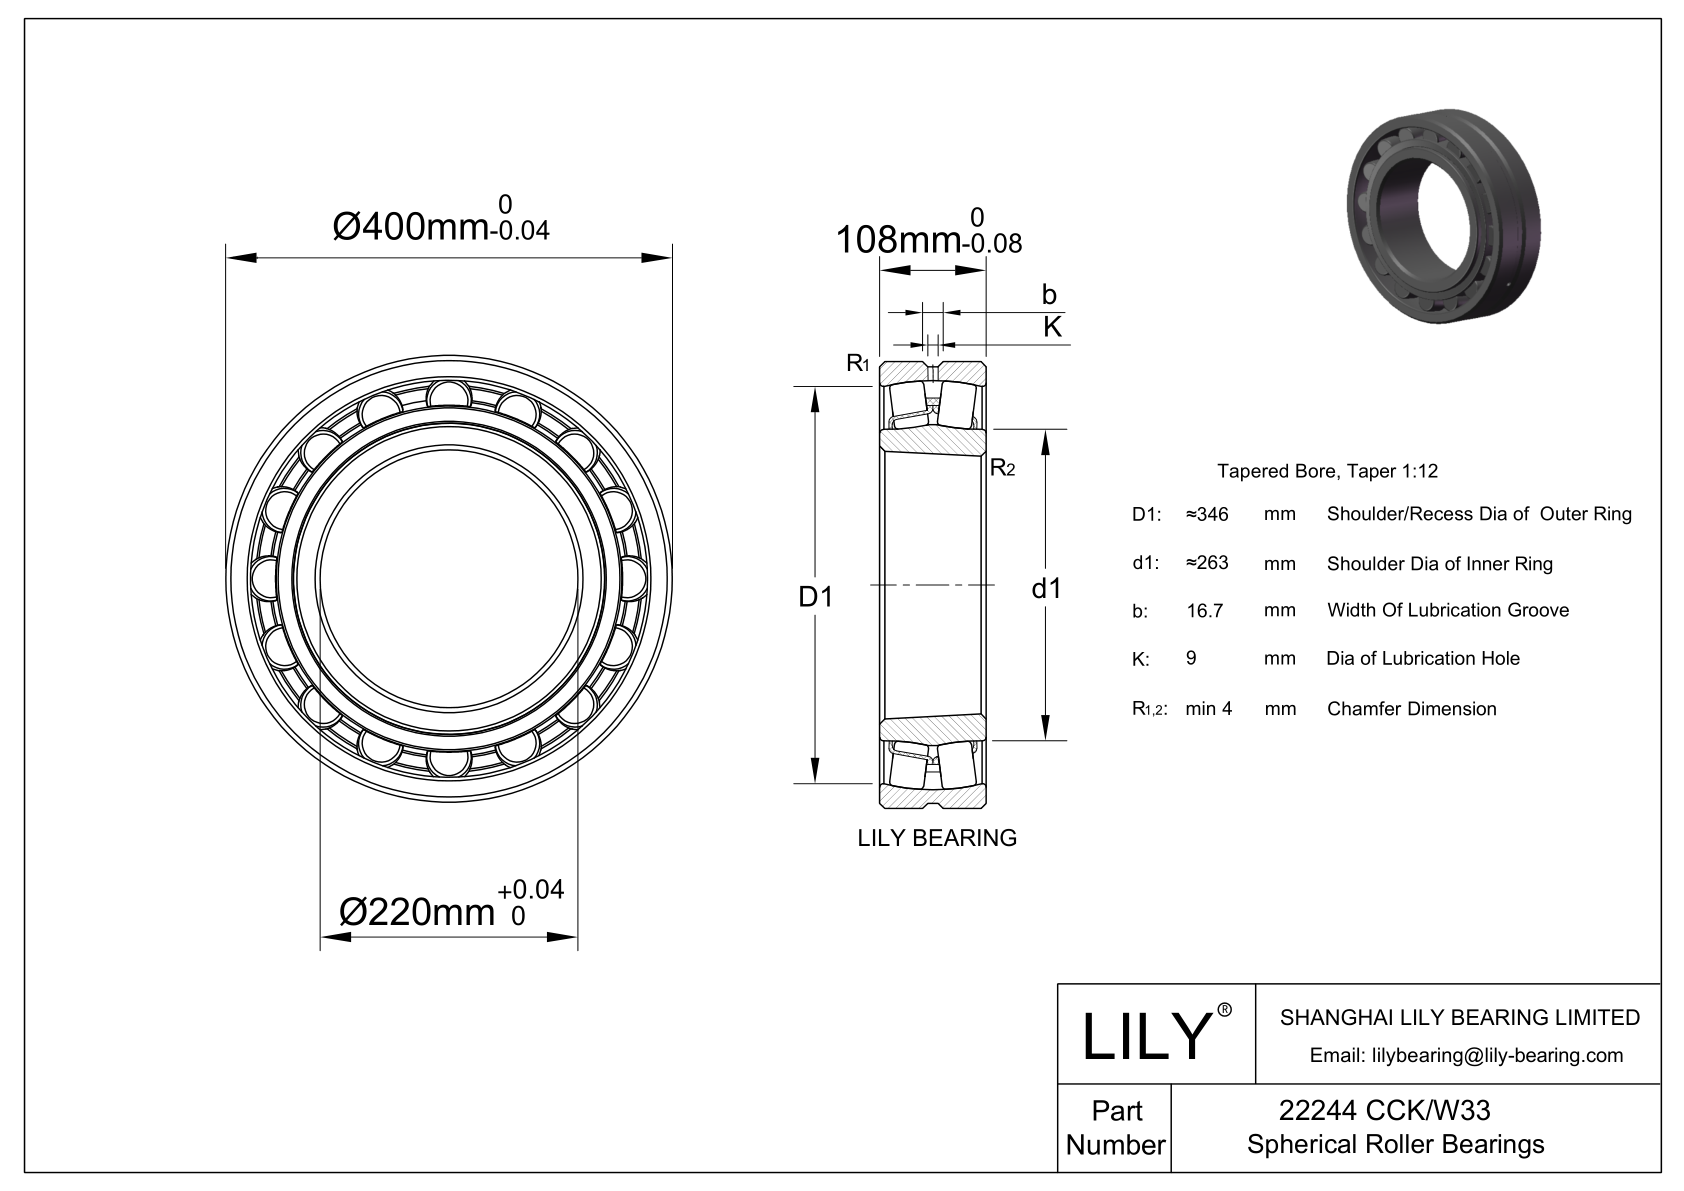 22244 CCK/W33 Double Row Spherical Roller Bearing cad drawing